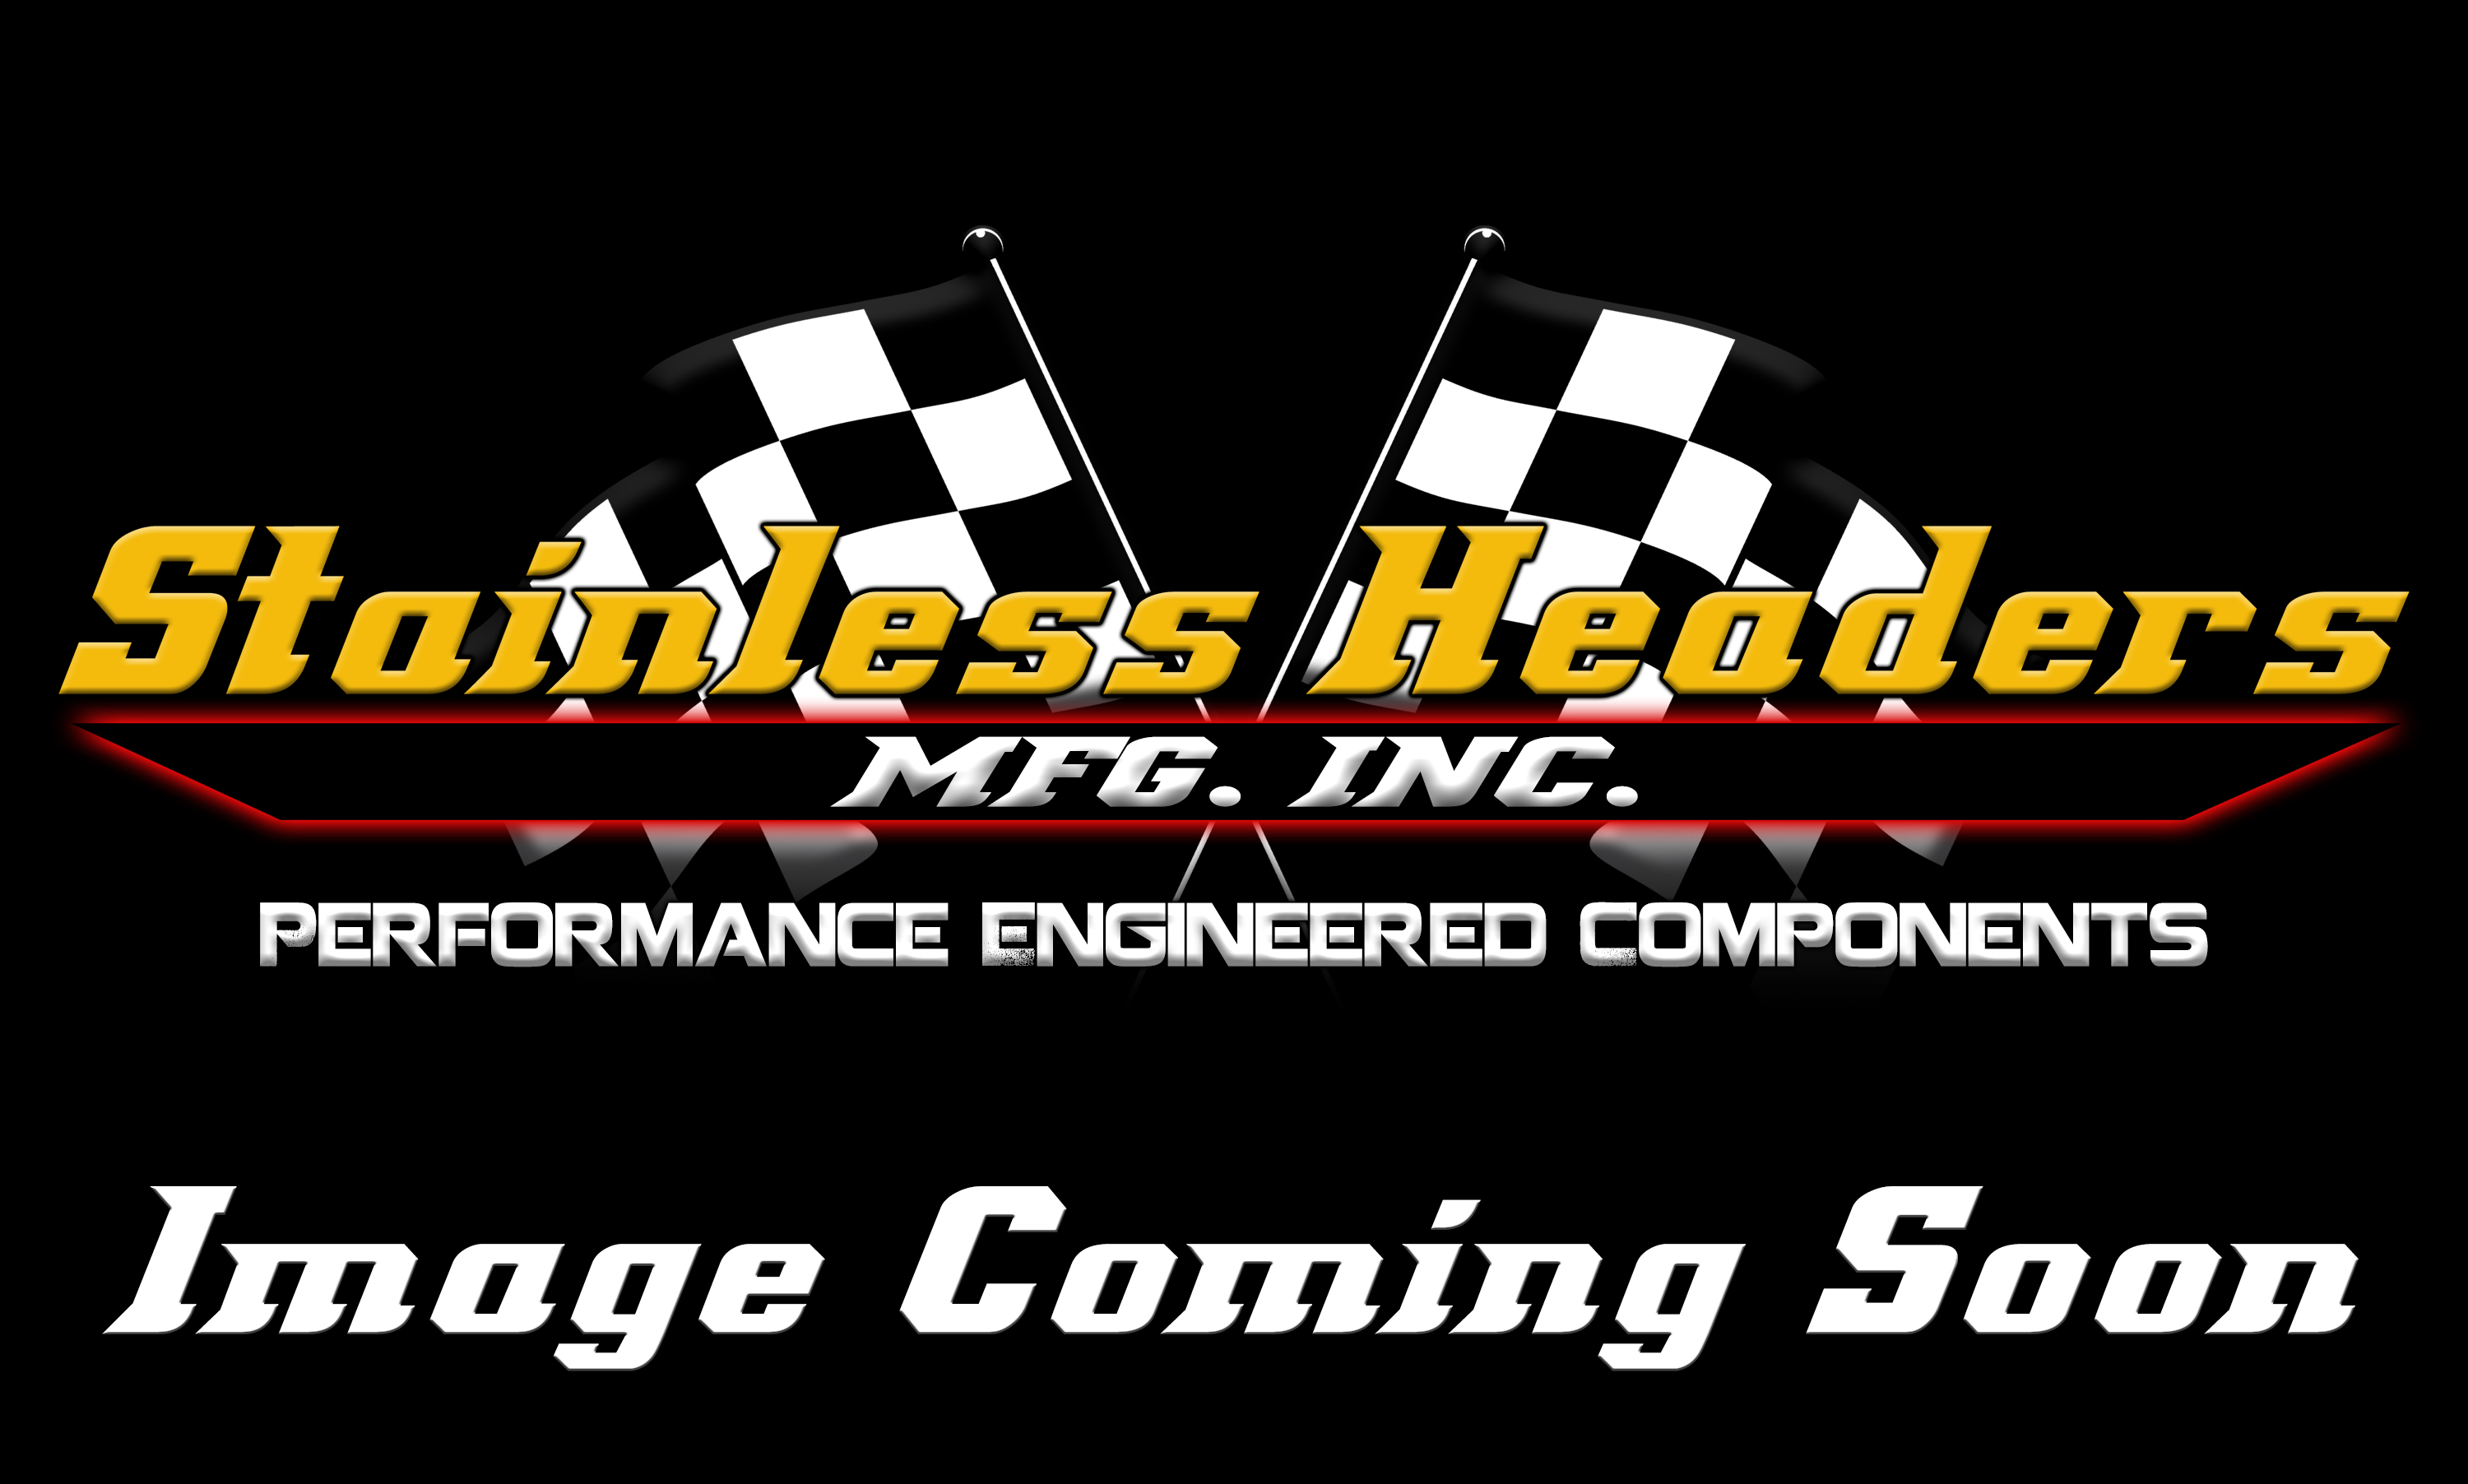 Stainless Headers - 2 3/8" Primary 3 into 1 Performance Merge Collector-18ga 304ss